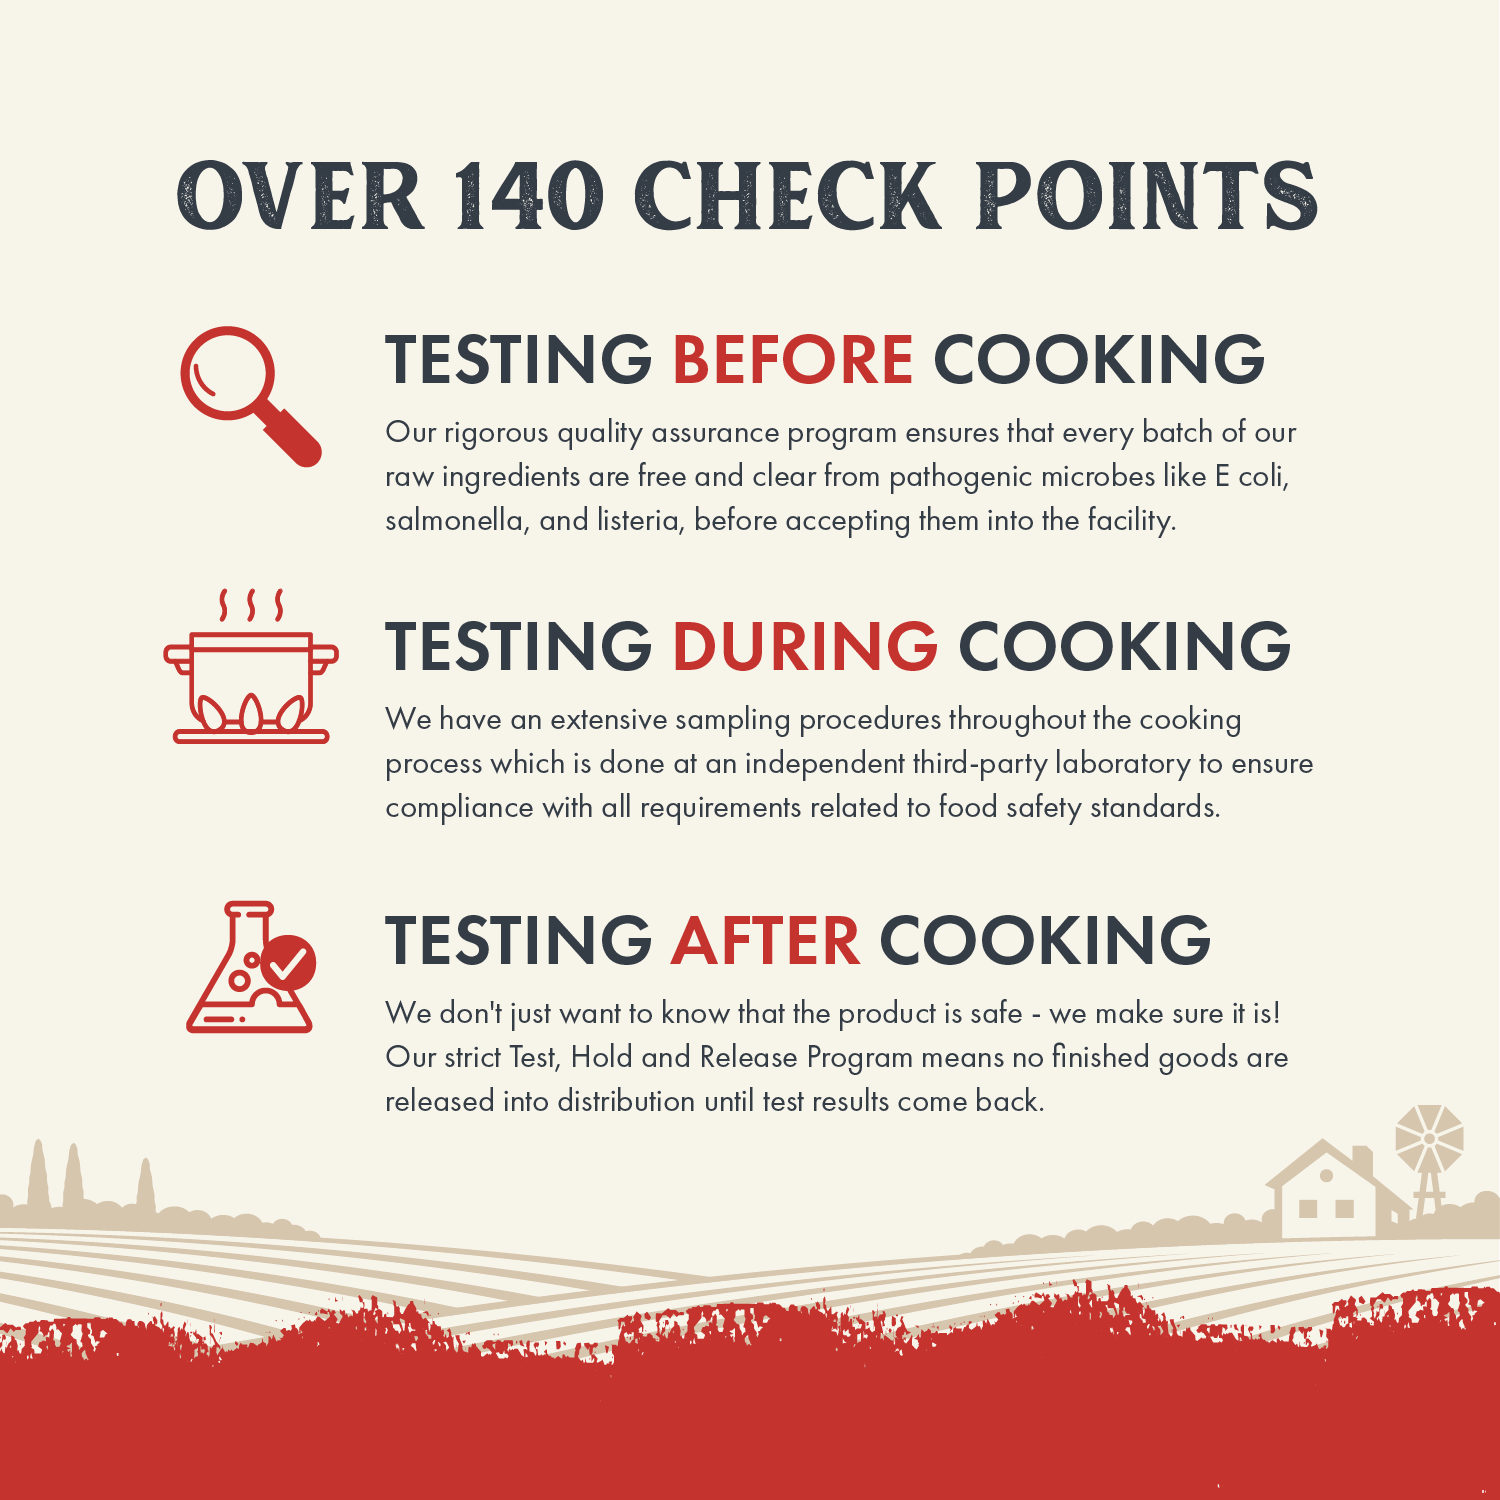 Infographic on Health Extension's Air Dry Dog food safety checks with over 140 checkpoints and thorough testing.